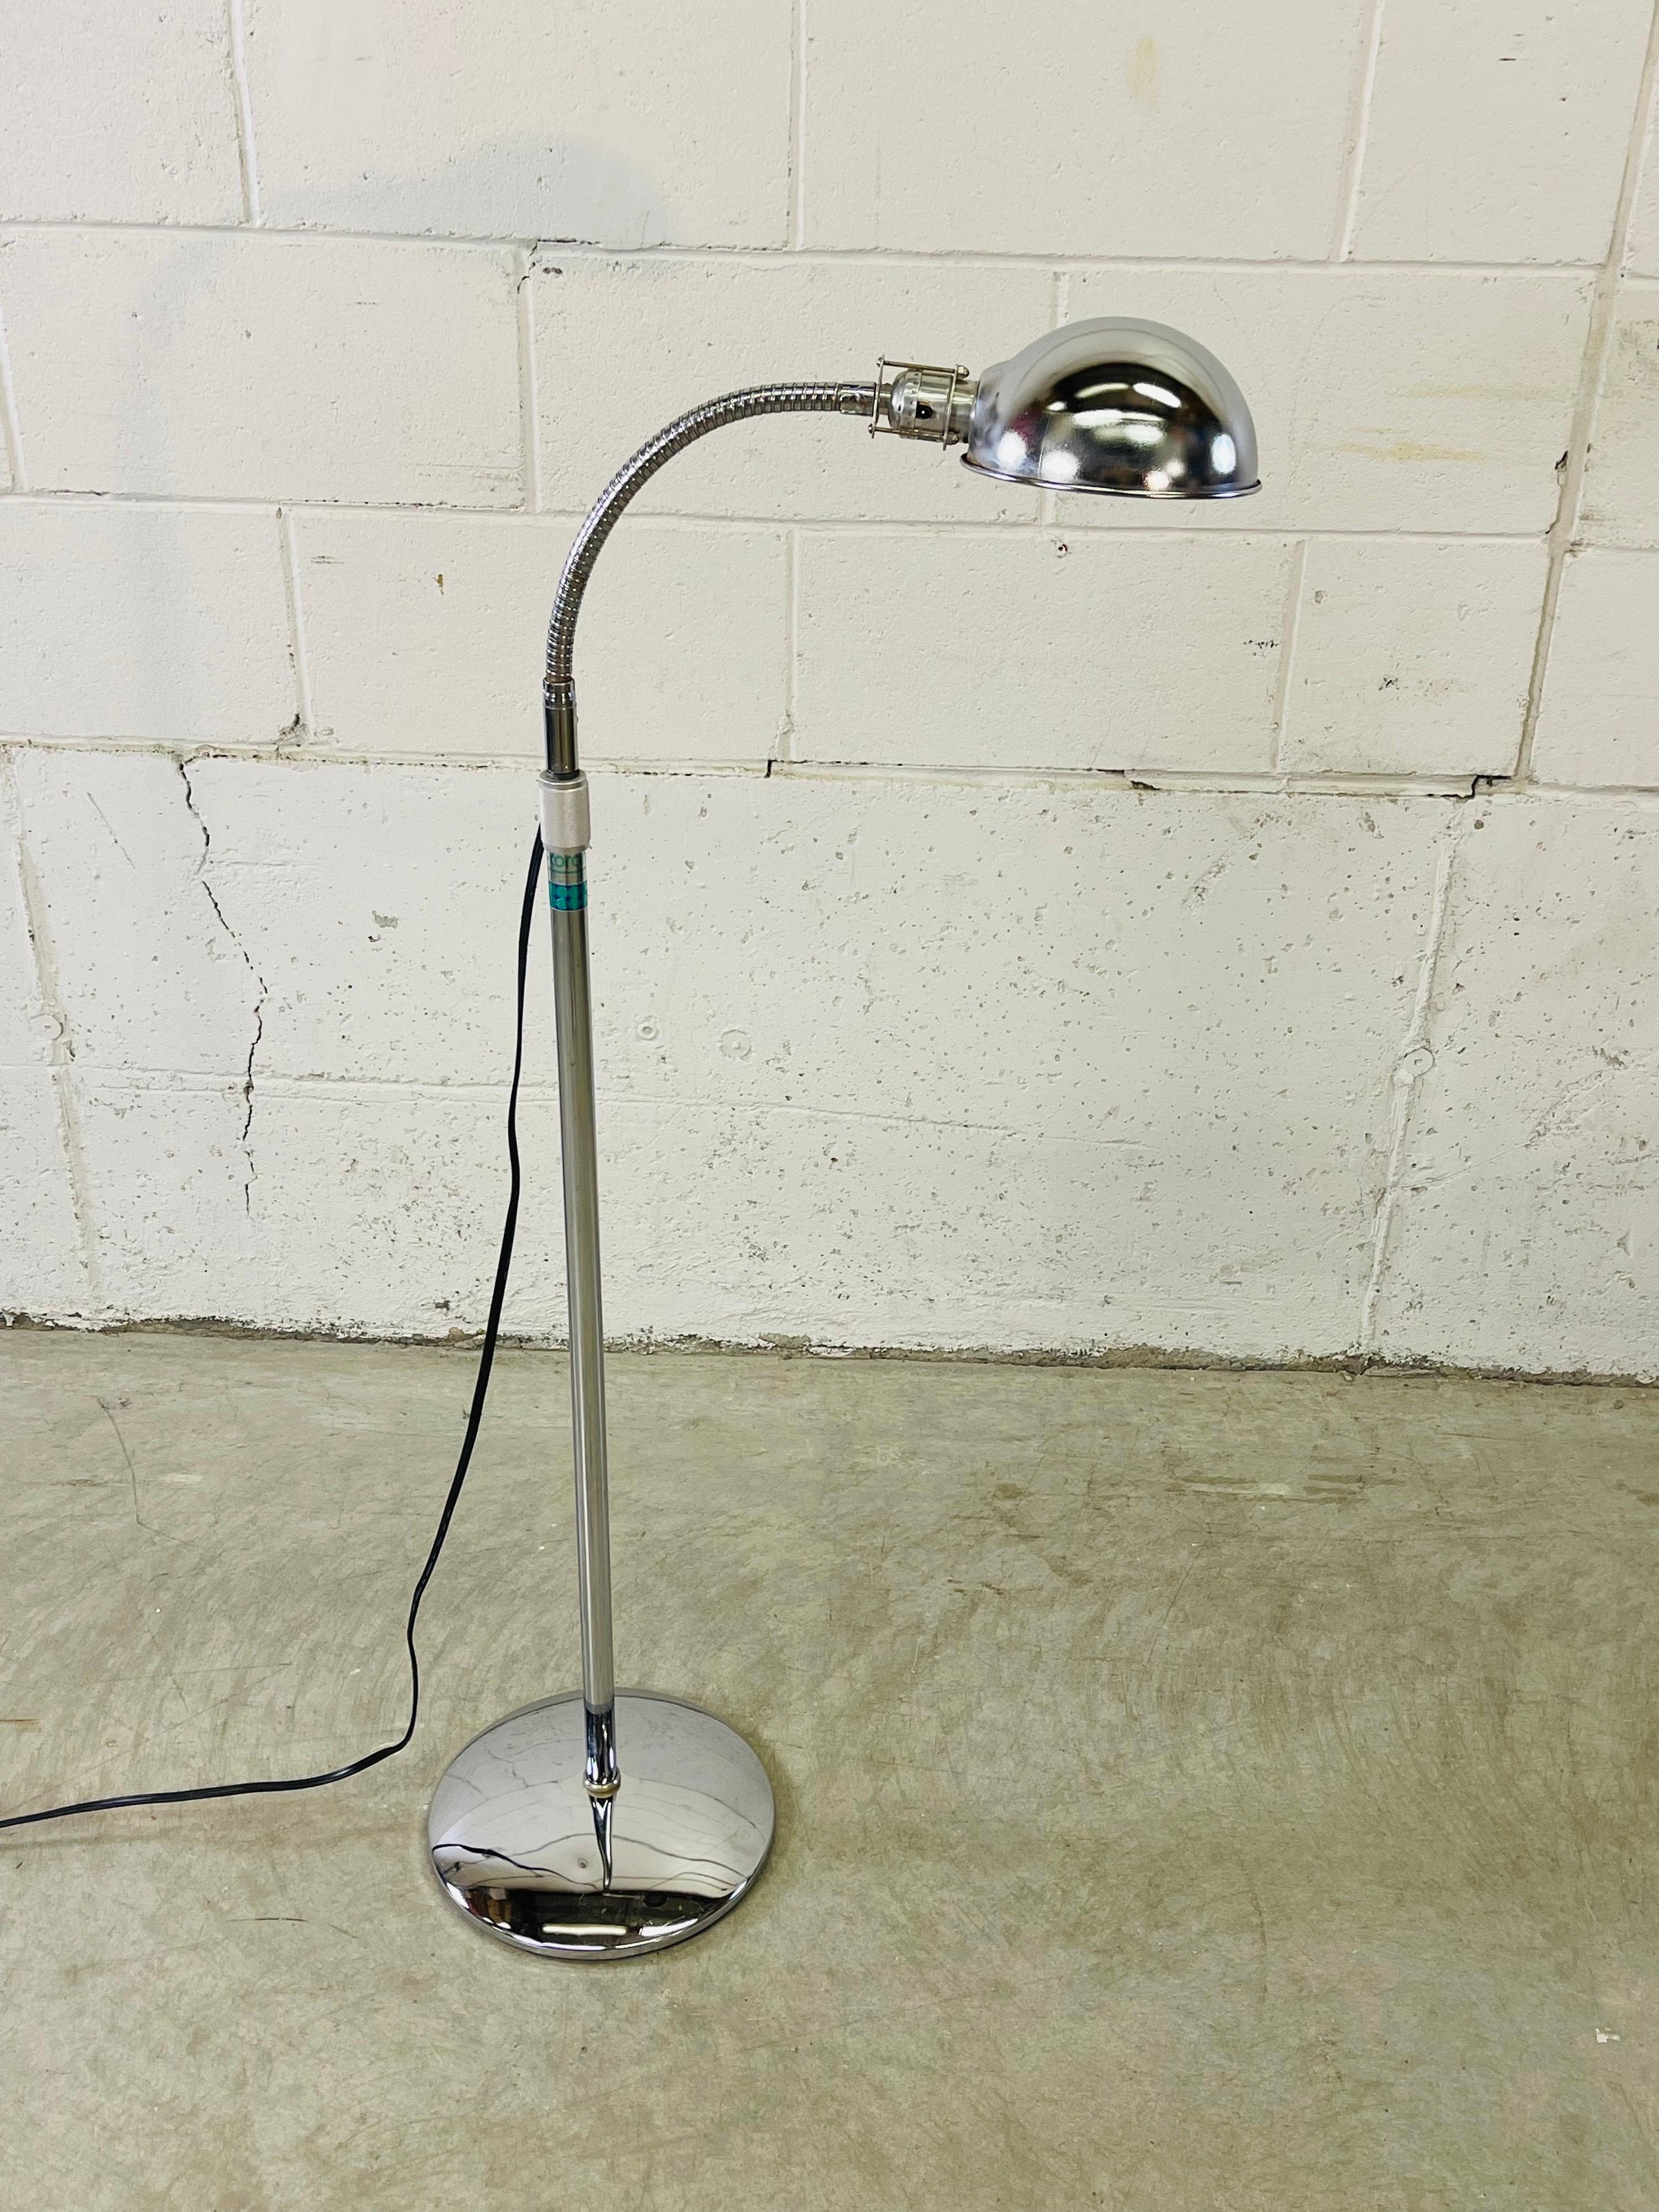 Vintage chrome gooseneck floor lamp with a round base. The lamp adjusts height to a maximum of 66” H. Wired for the US and in working condition, the lamp uses a standard size bulb up to 100 watts. Marked.